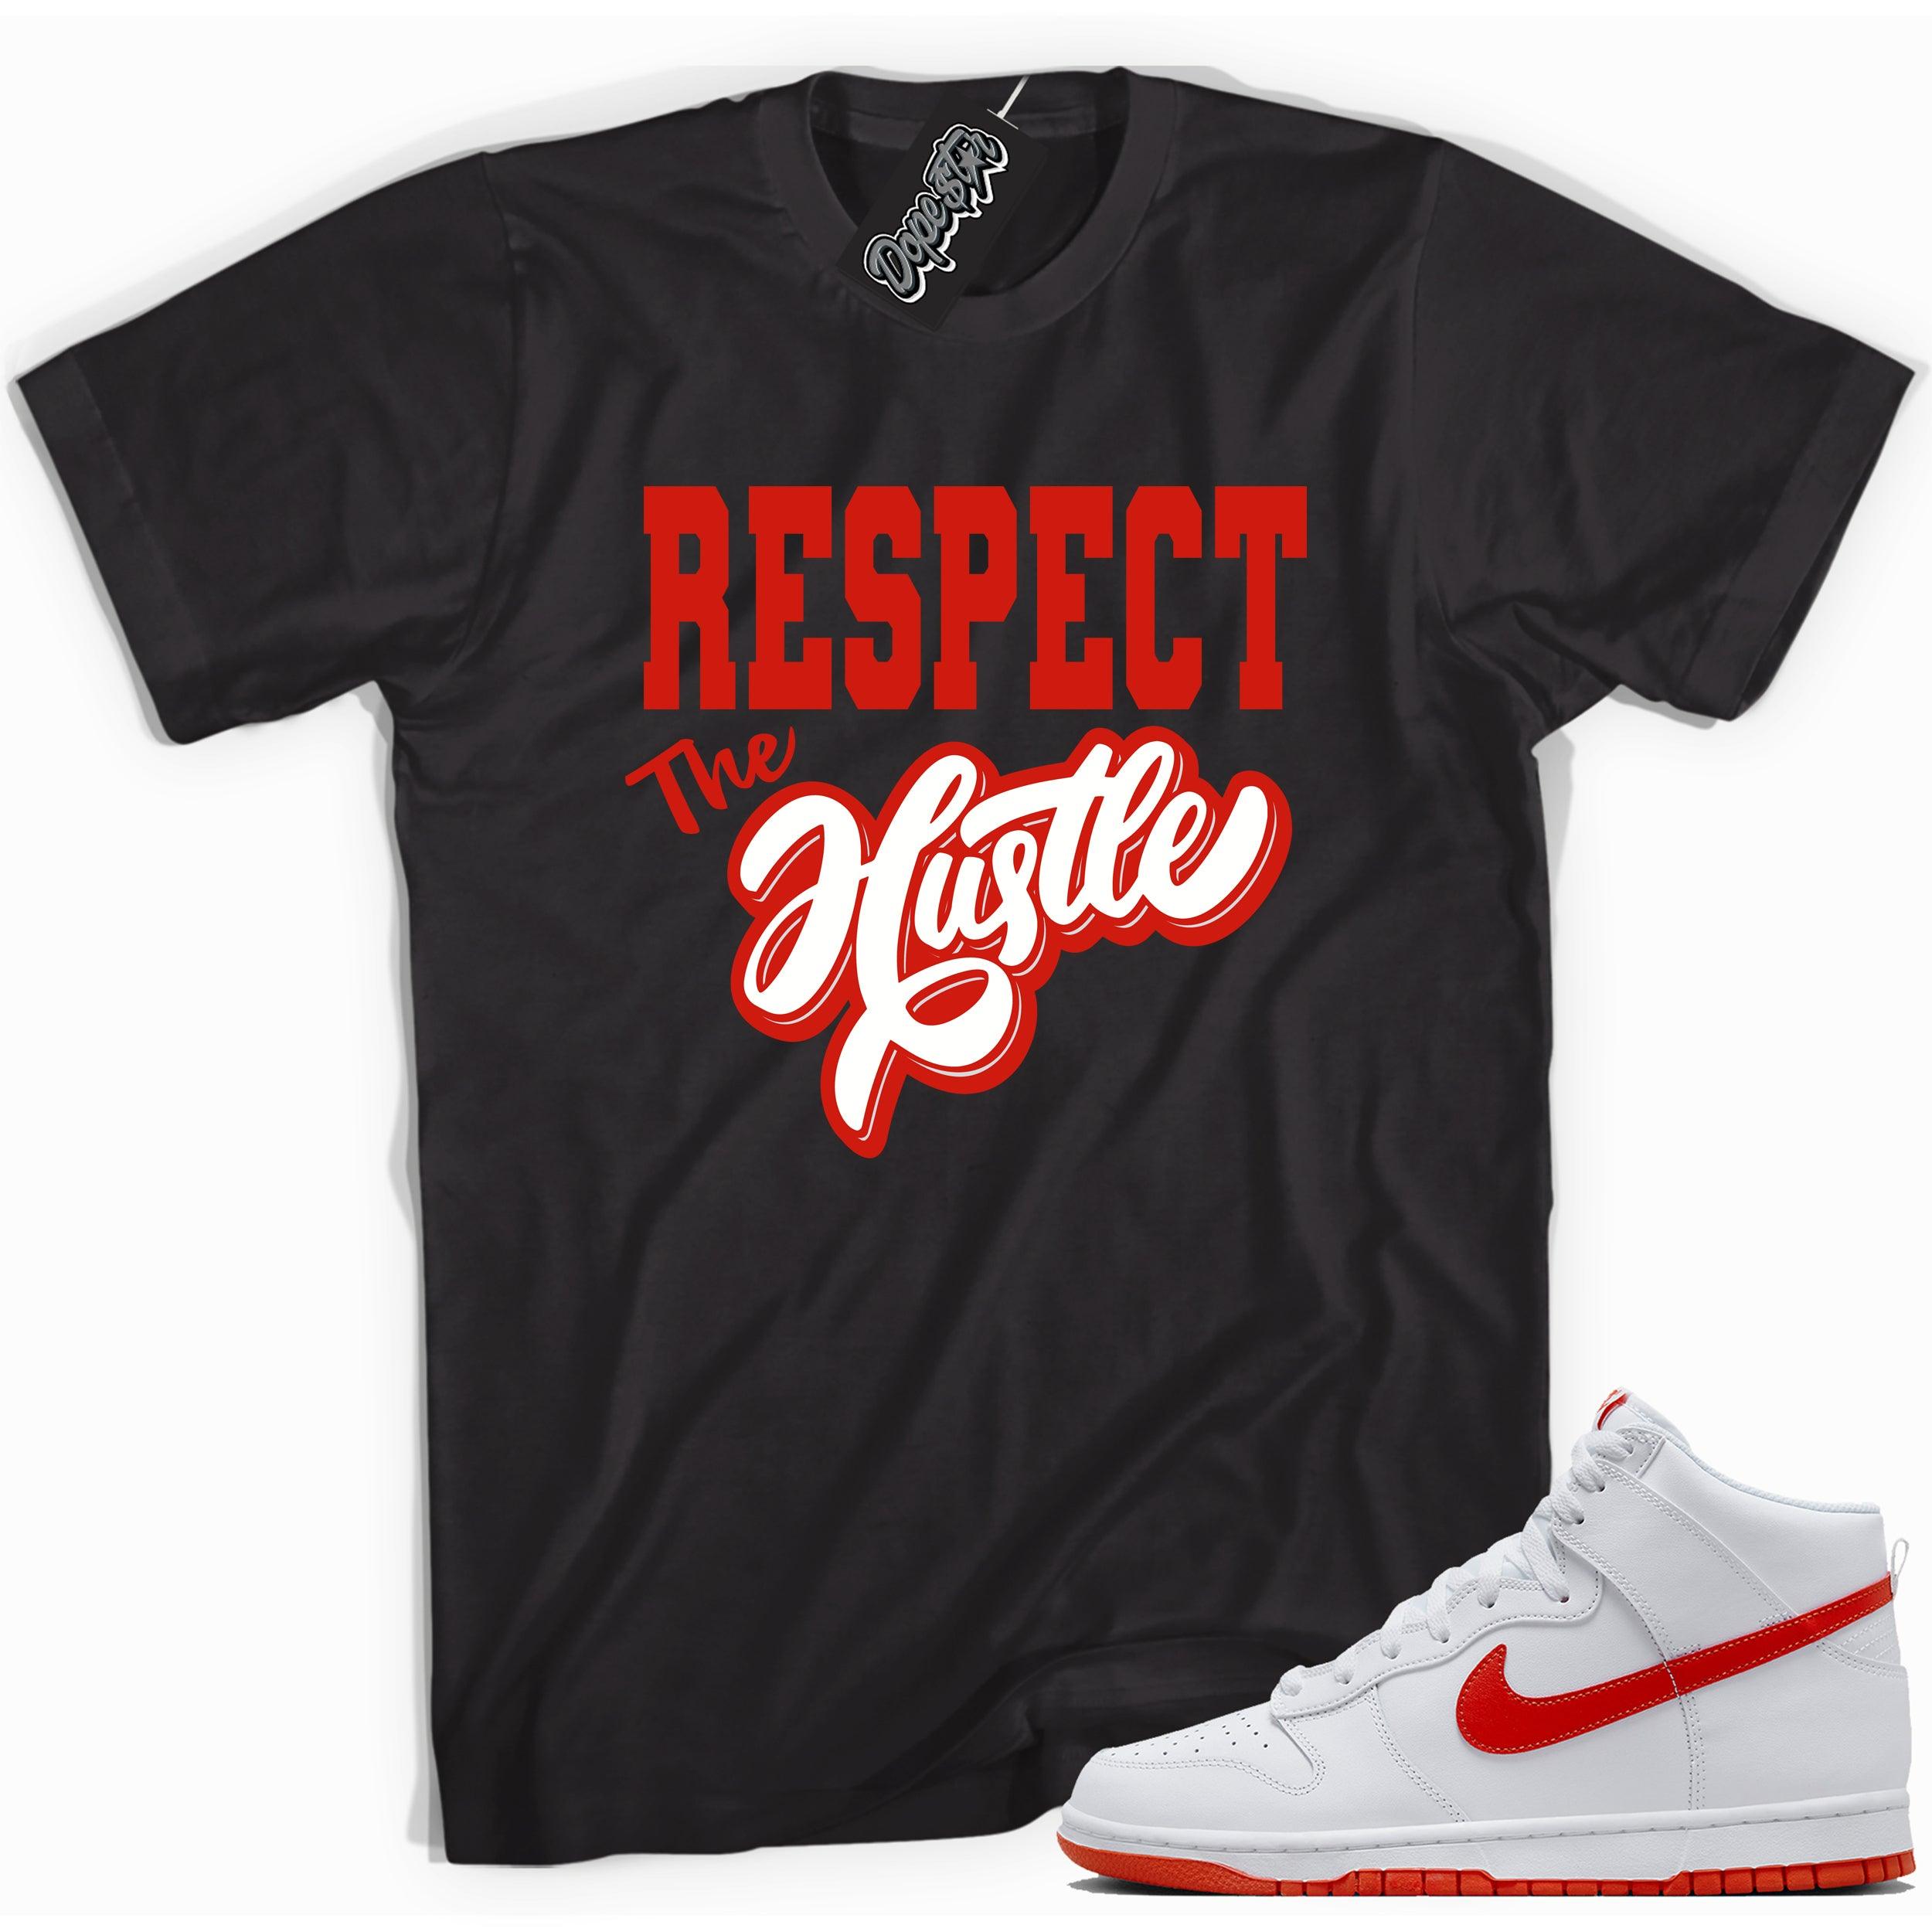 Cool black graphic tee with 'respect the hustle' print, that perfectly matches Nike Dunk High White Picante Red sneakers.